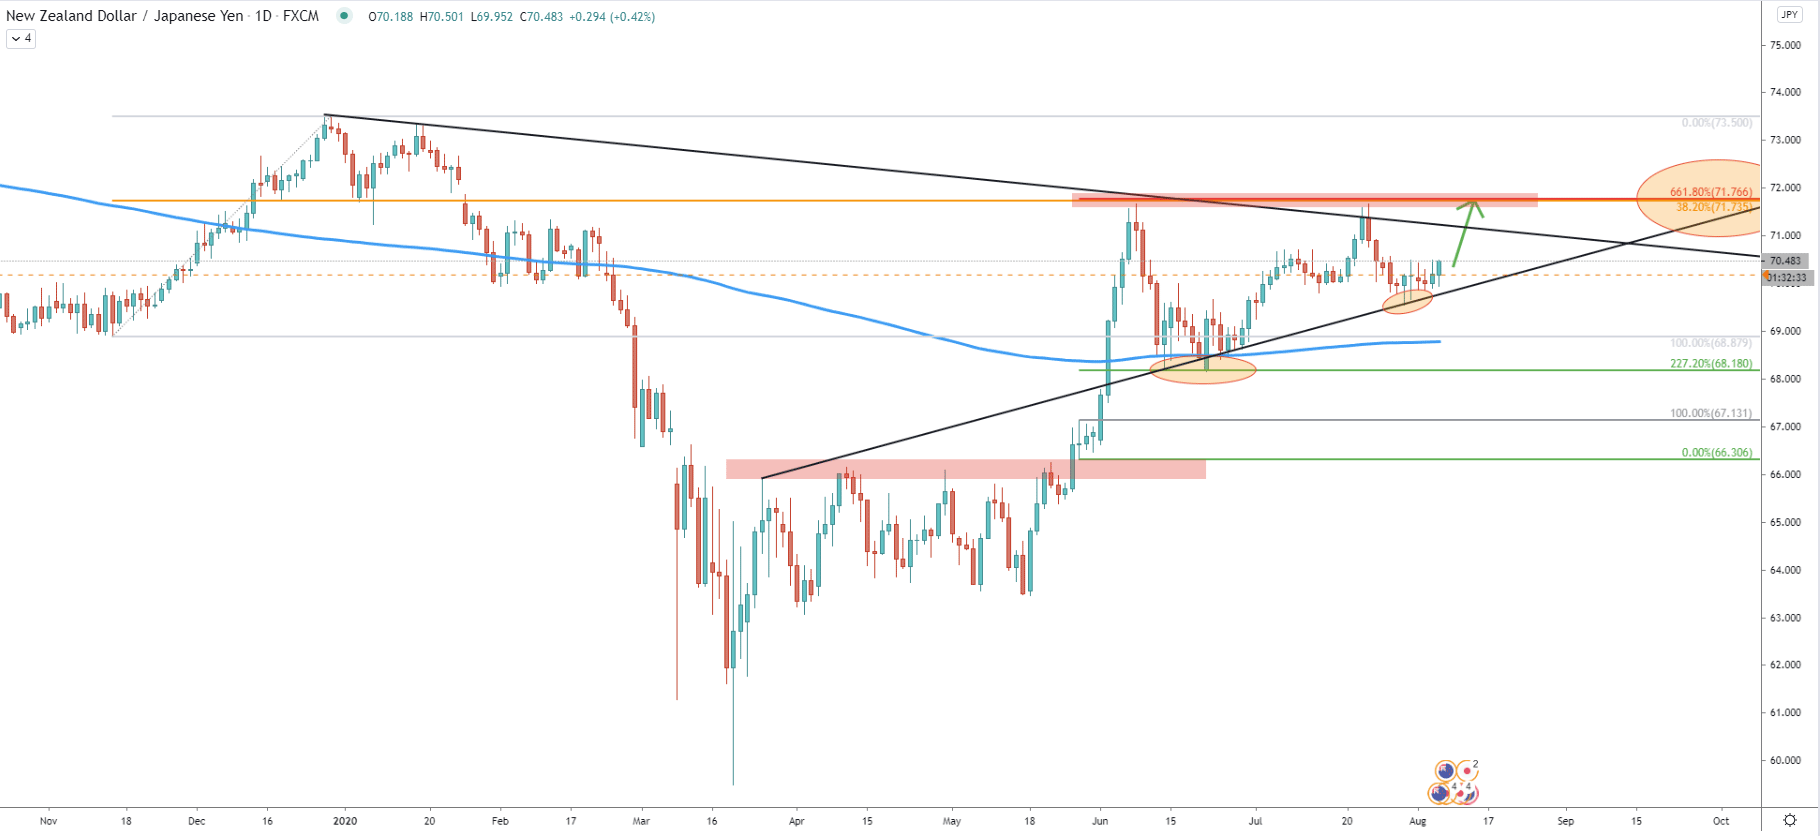 NZD/JPY Daily Technical Analysis 6 Aug 2020